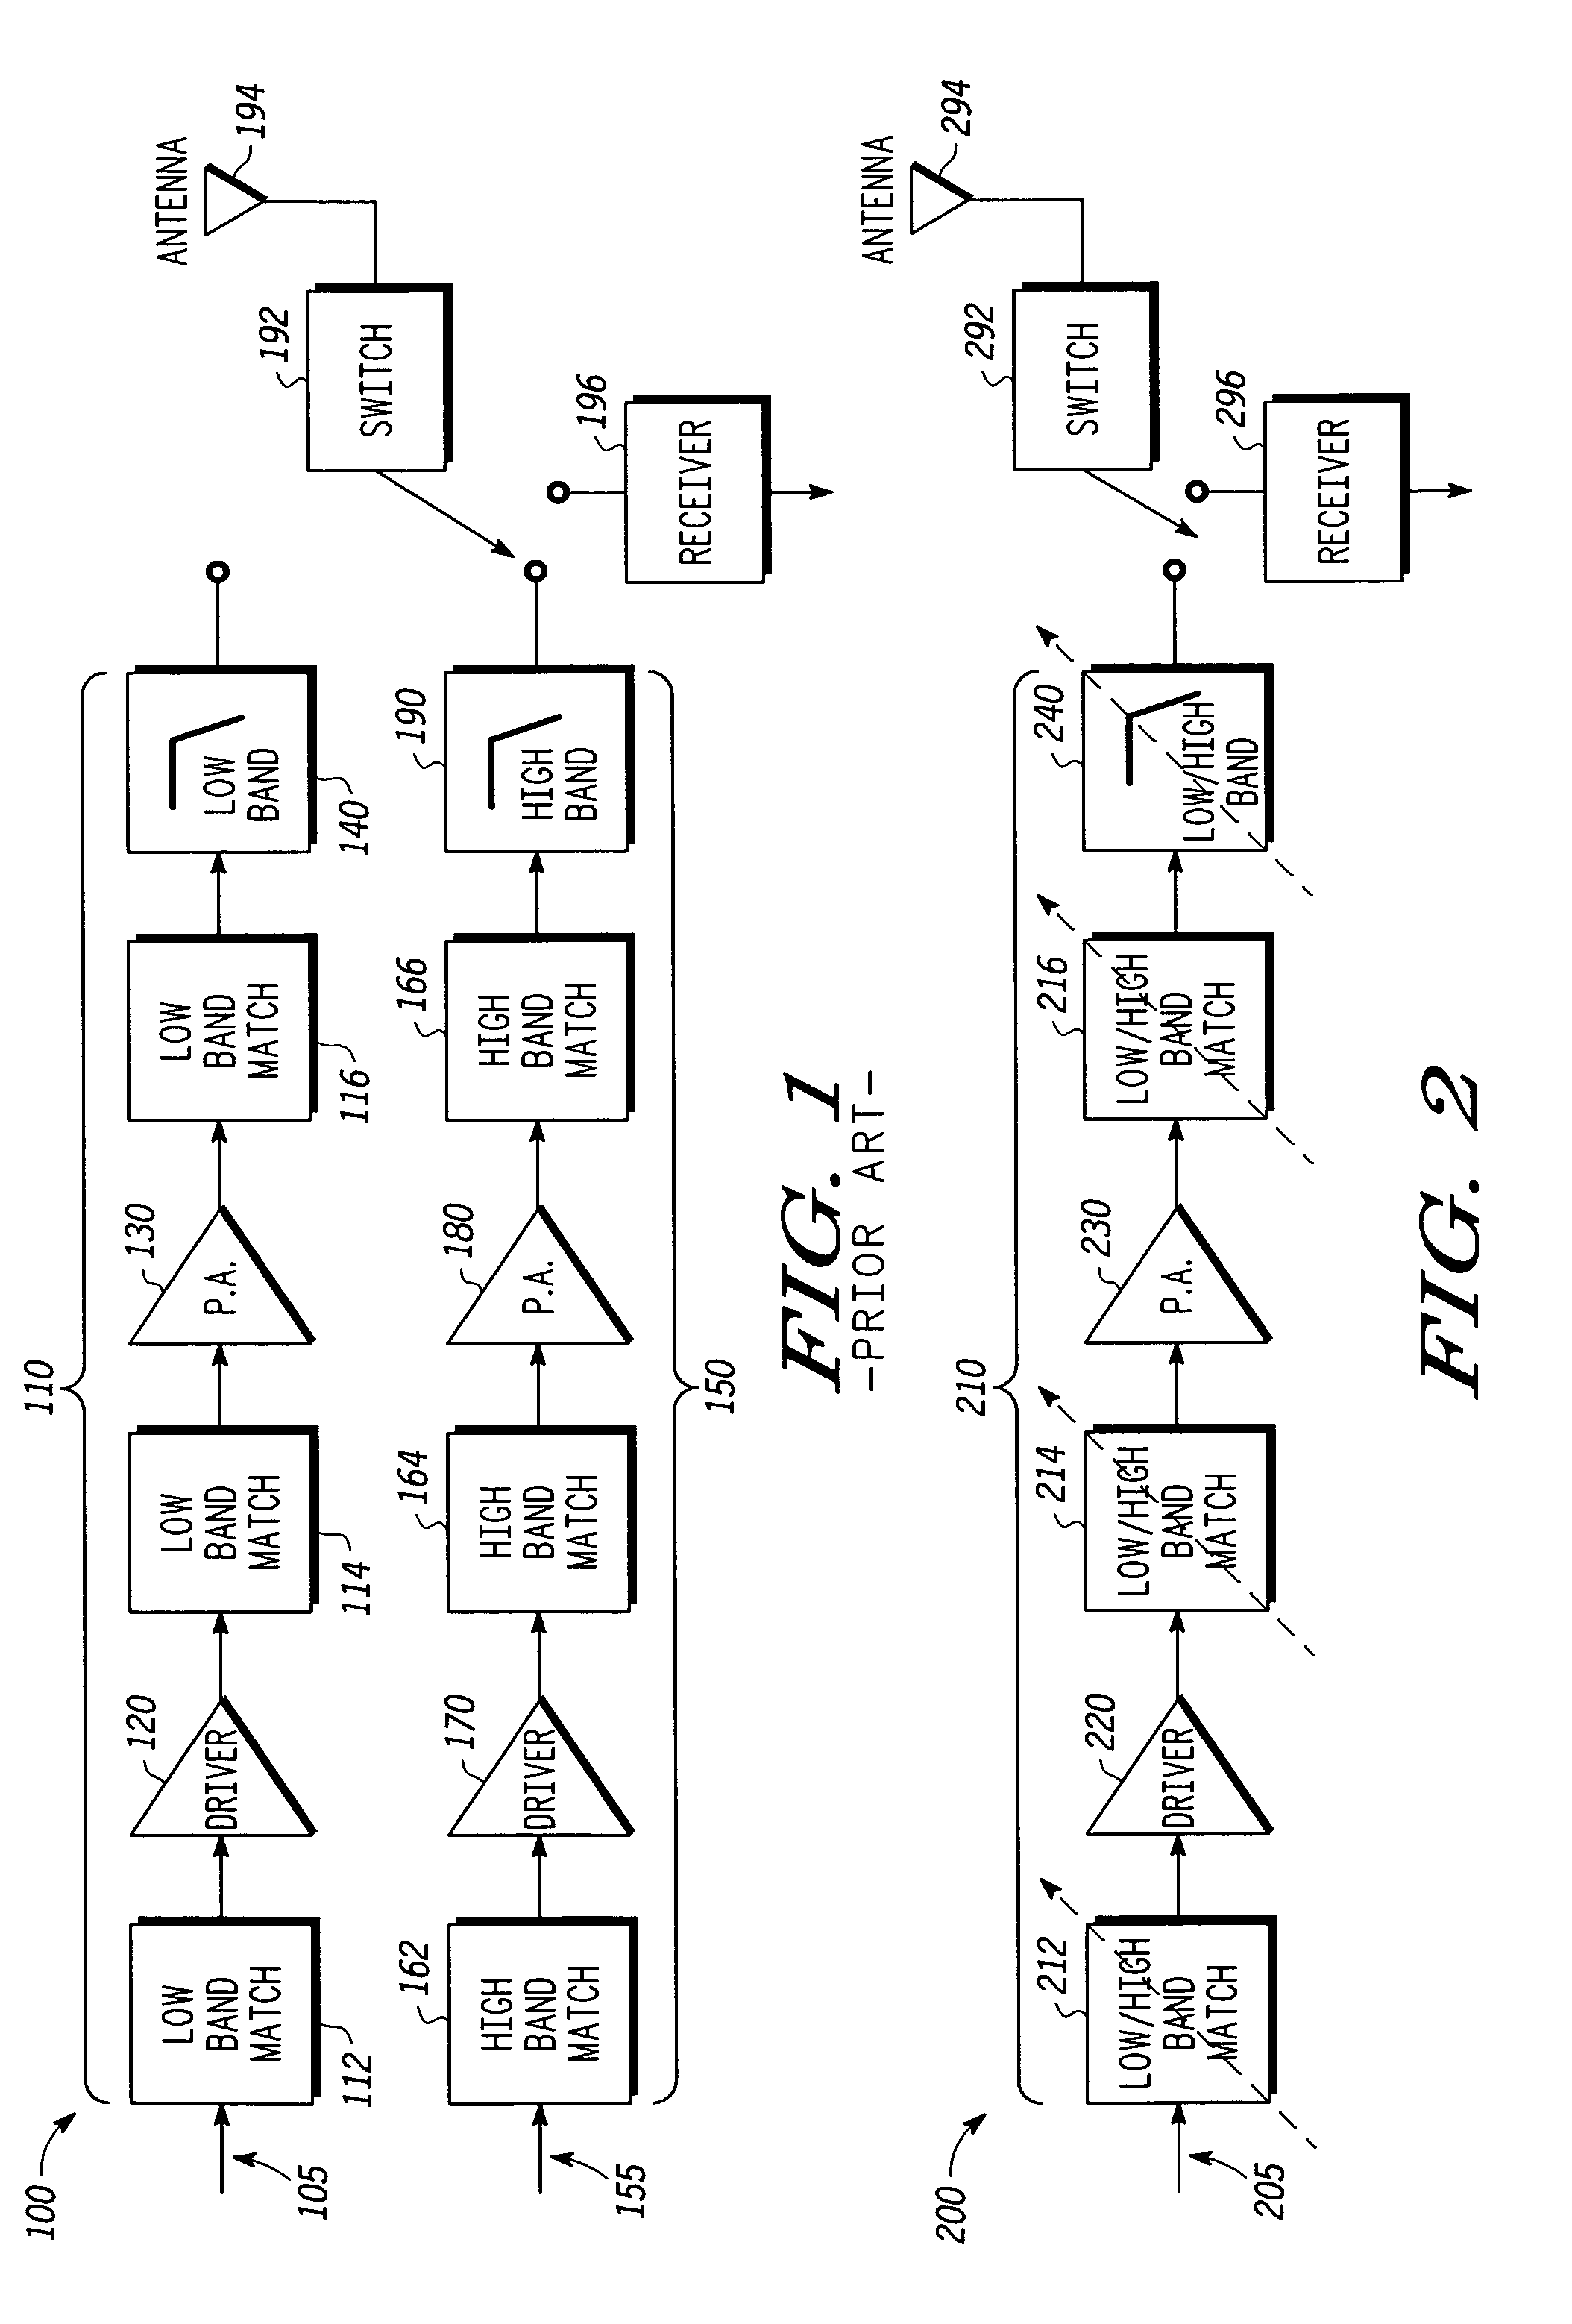 Re-configurable impedance matching and harmonic filter system